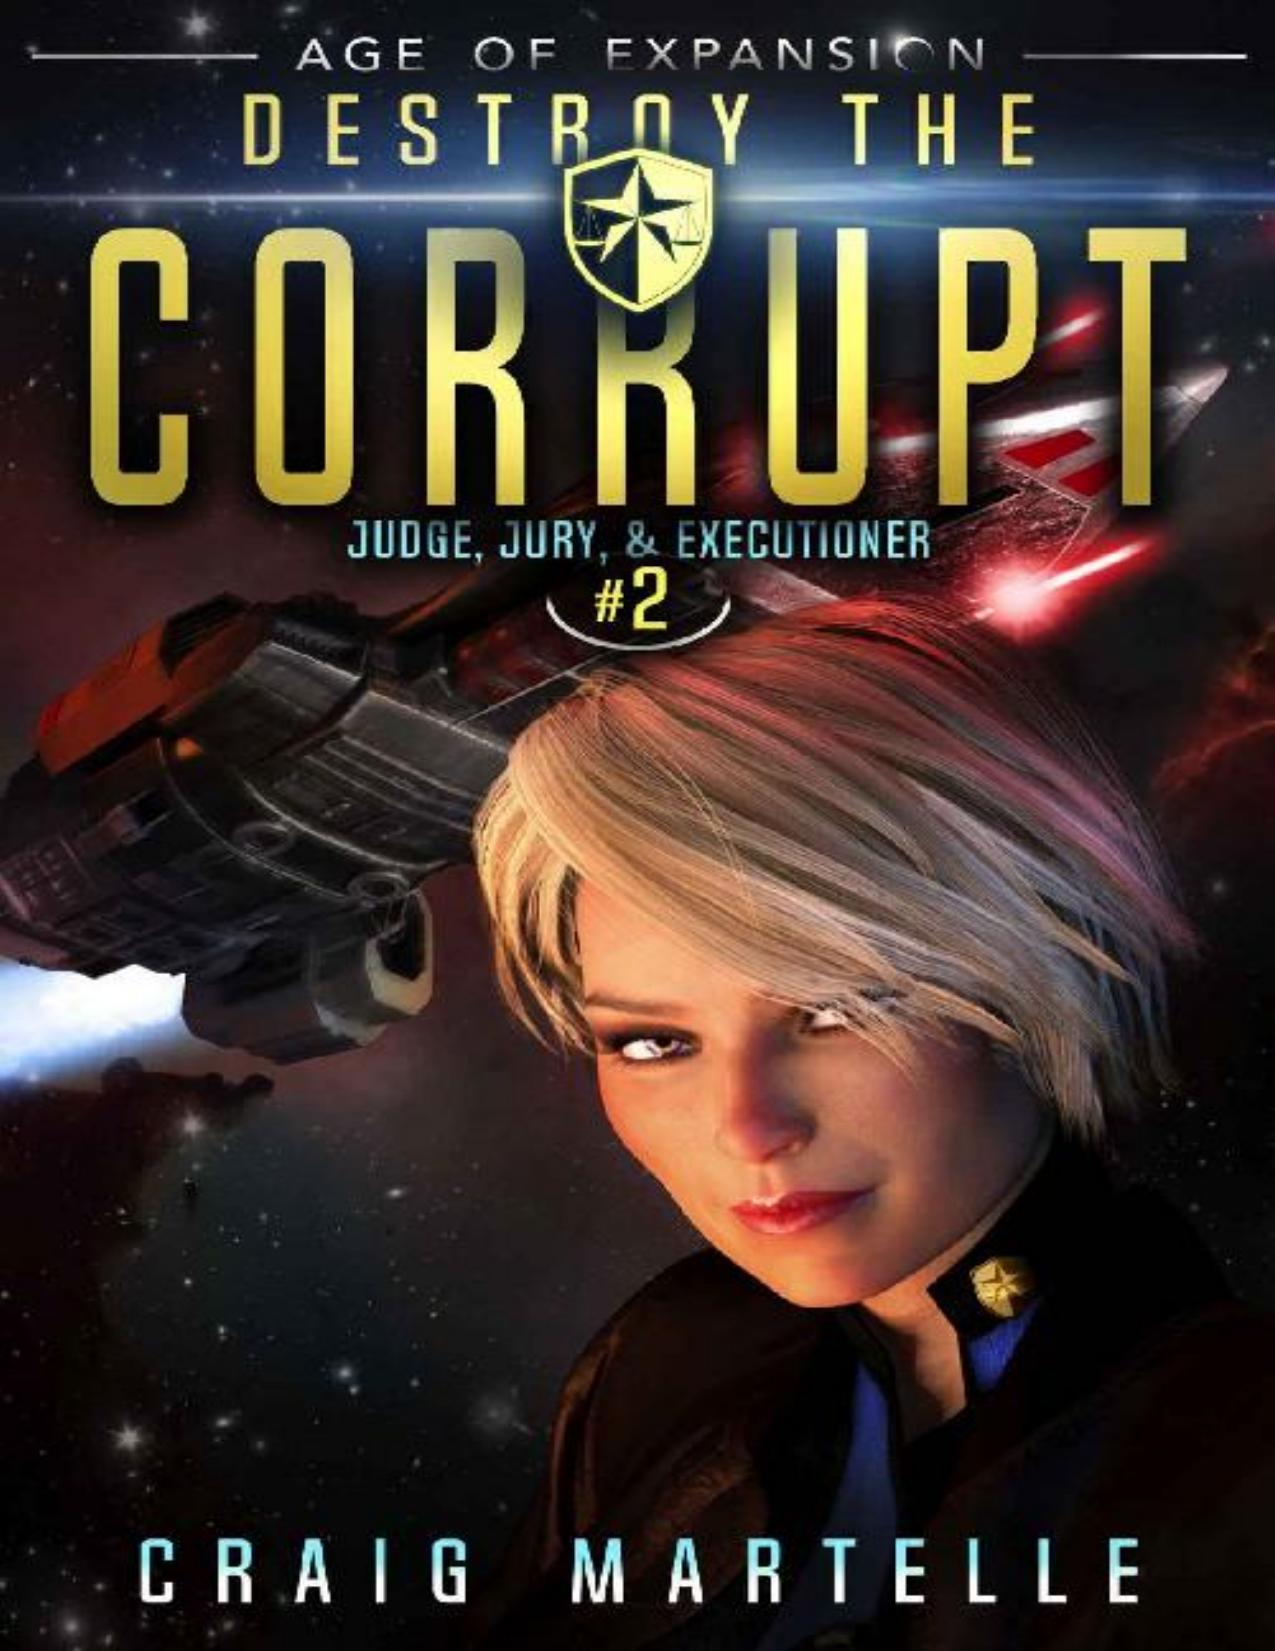 Destroy The Corrupt: A Space Opera Adventure Legal Thriller (Judge, Jury, & Executioner Book 2) by Craig Martelle & Michael Anderle